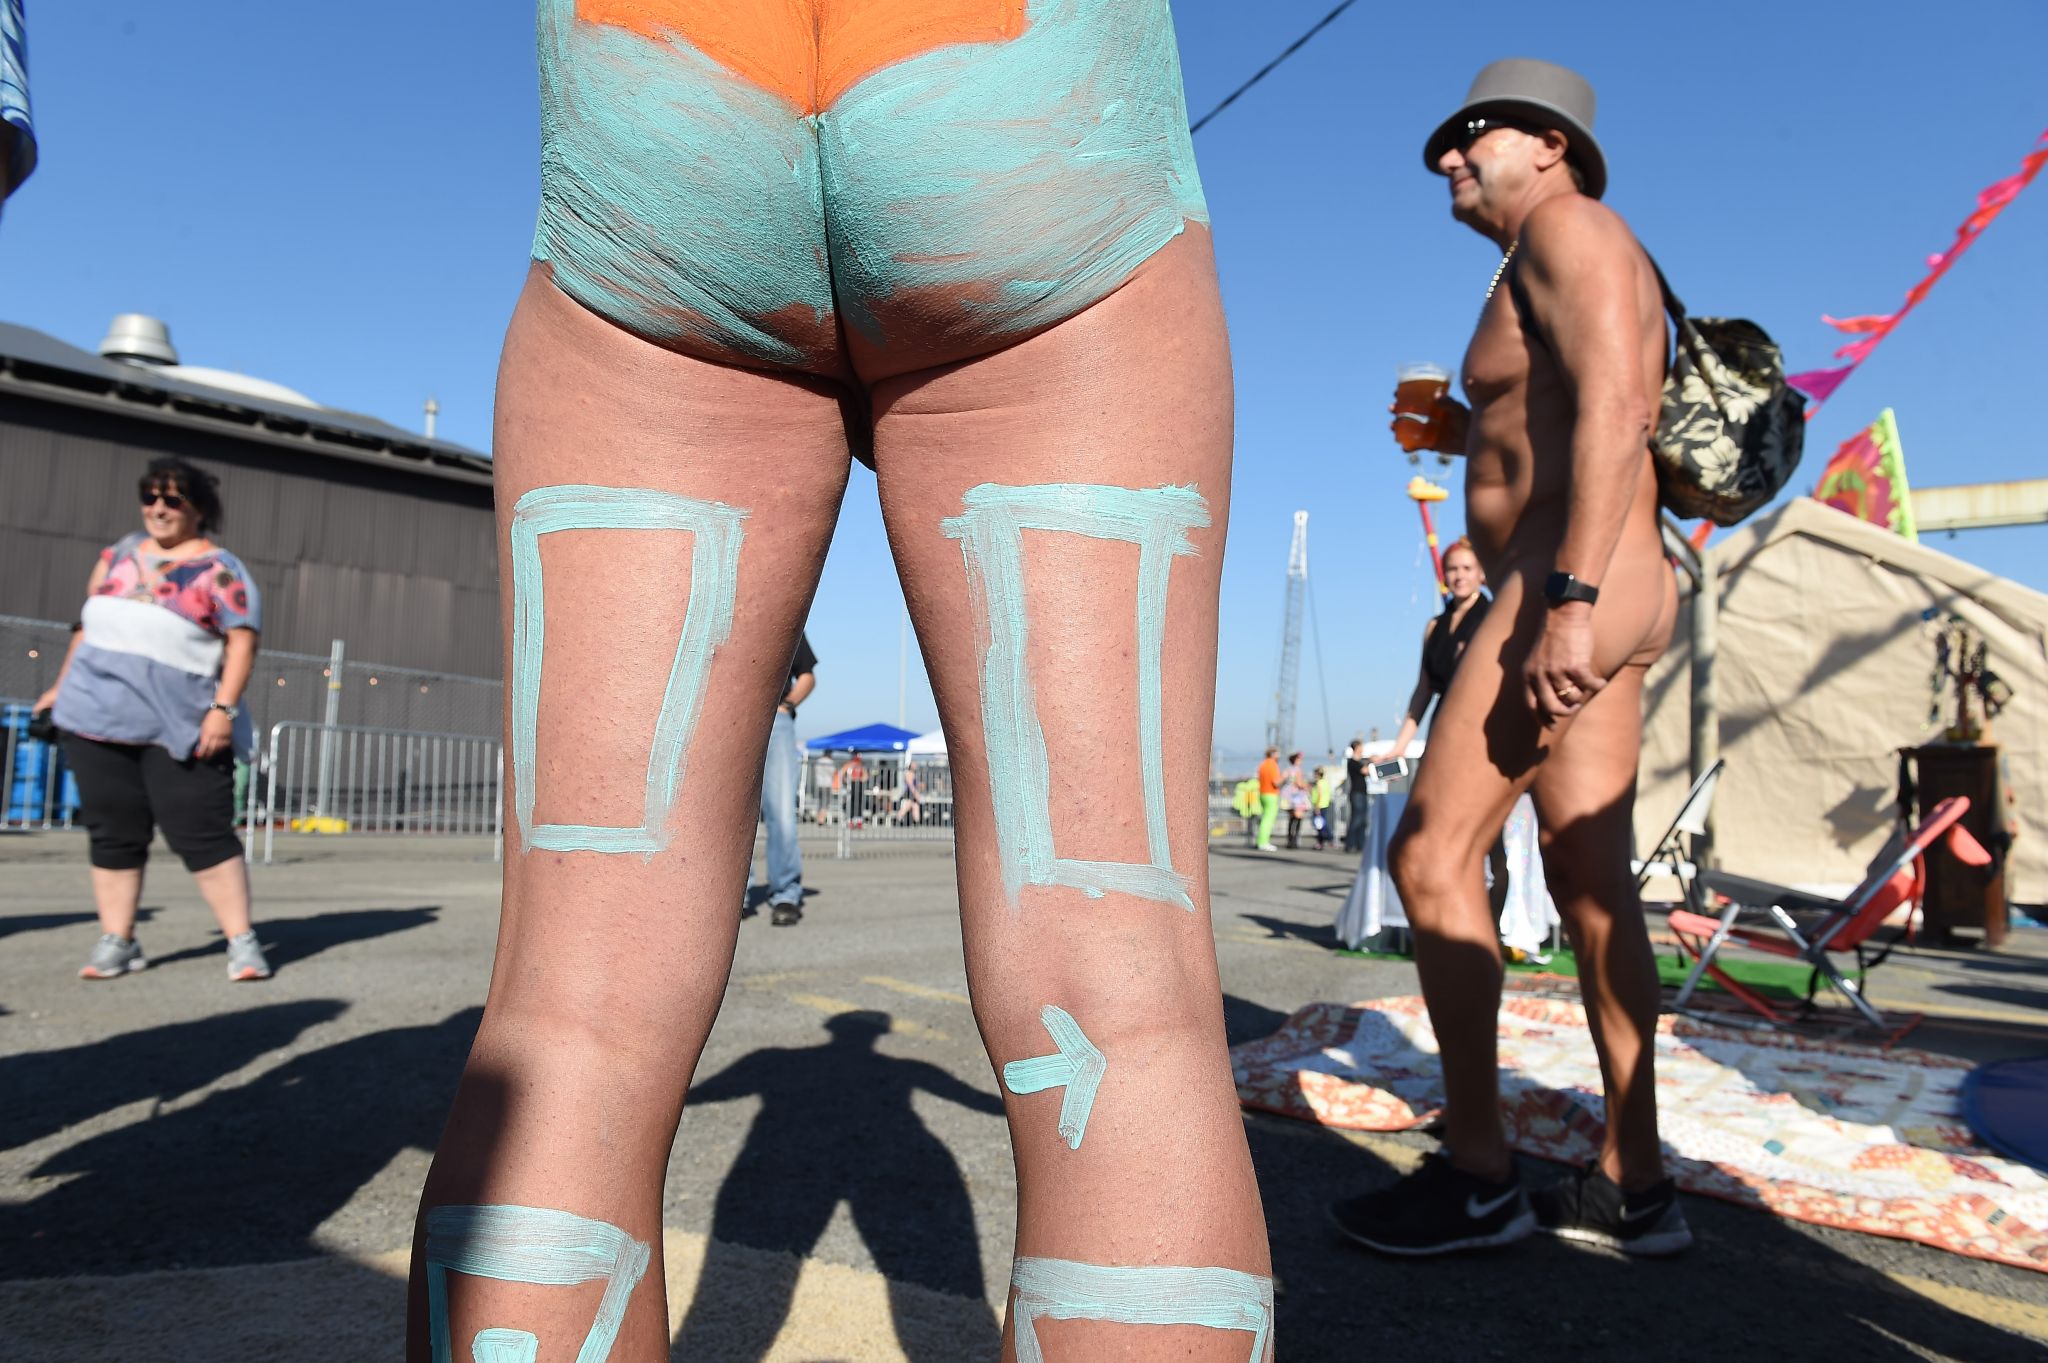 Nude body painting takes over San Francisco's 'urban Burning Man.